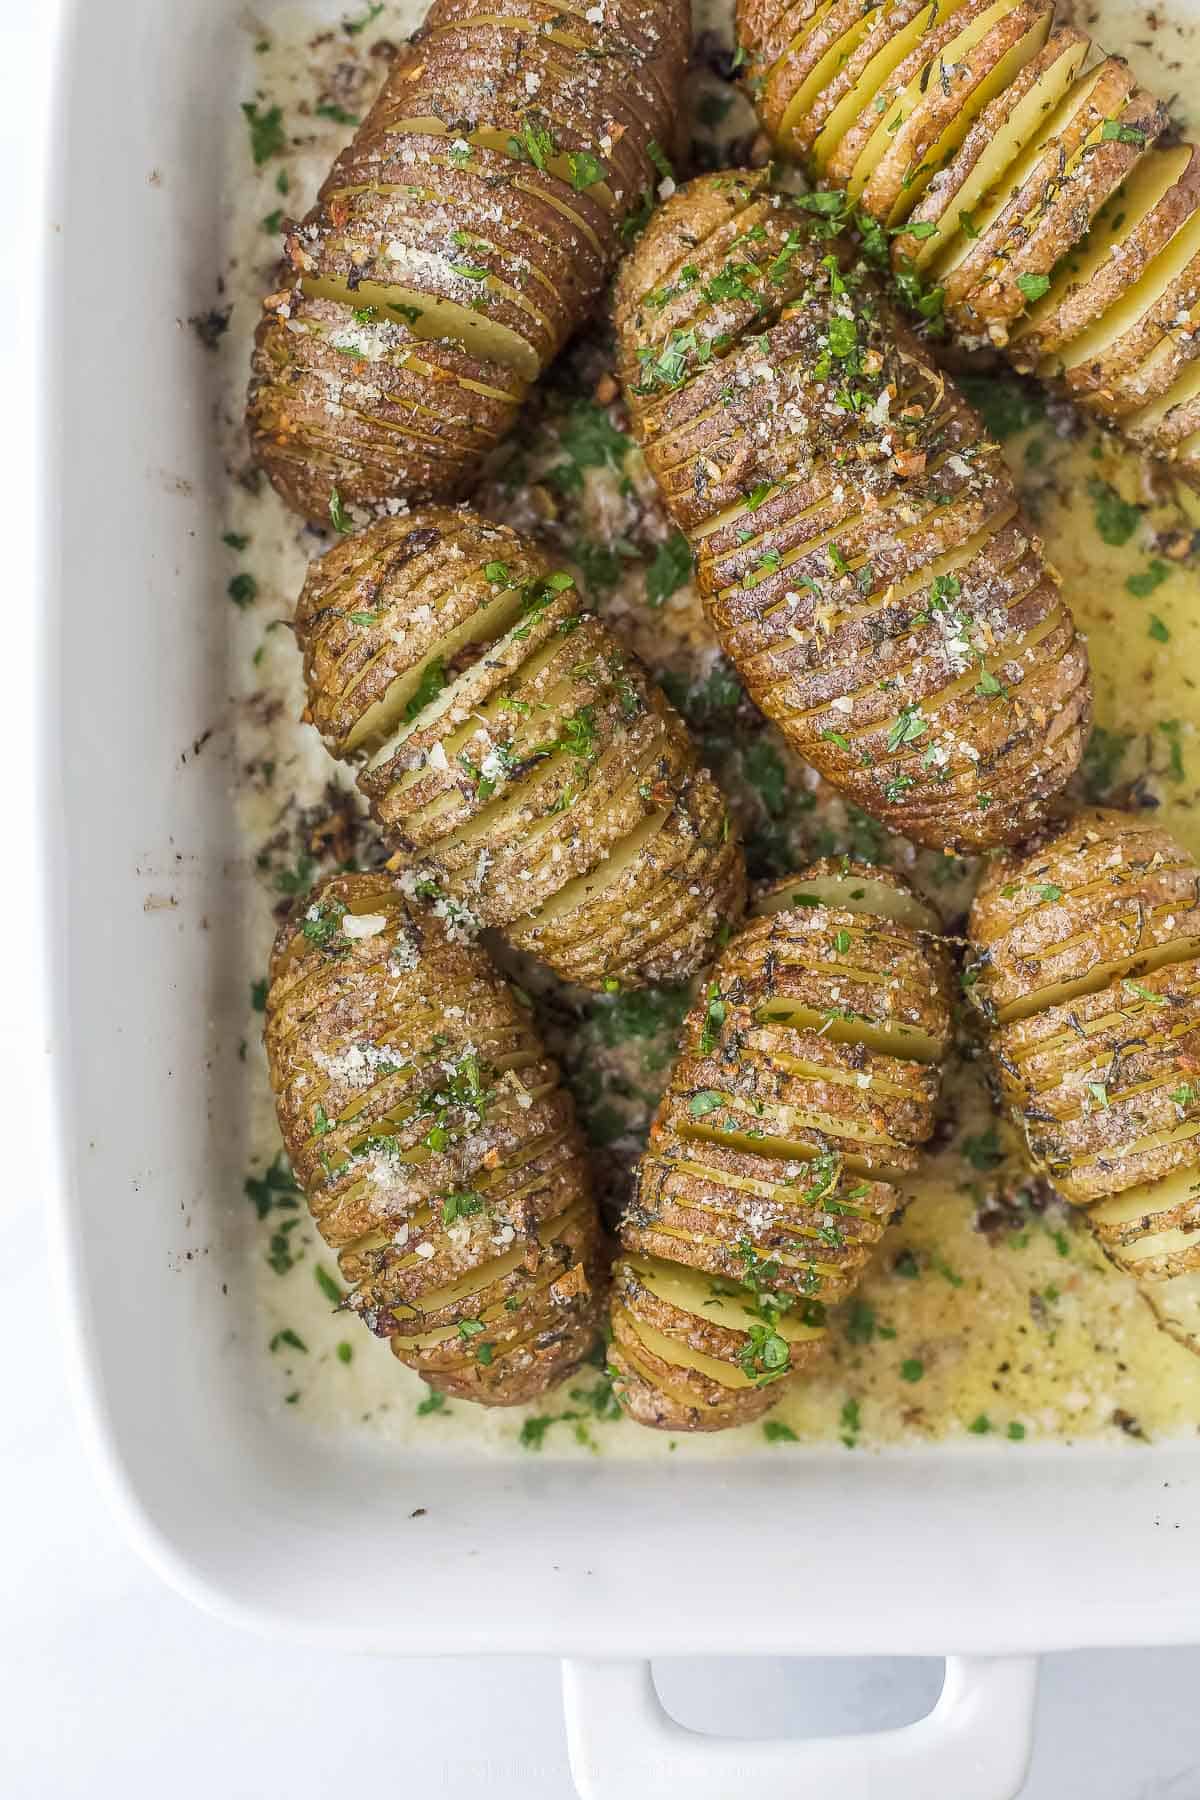 cooked hasselback potatoes in a white casserole dish with herbs and butter on top